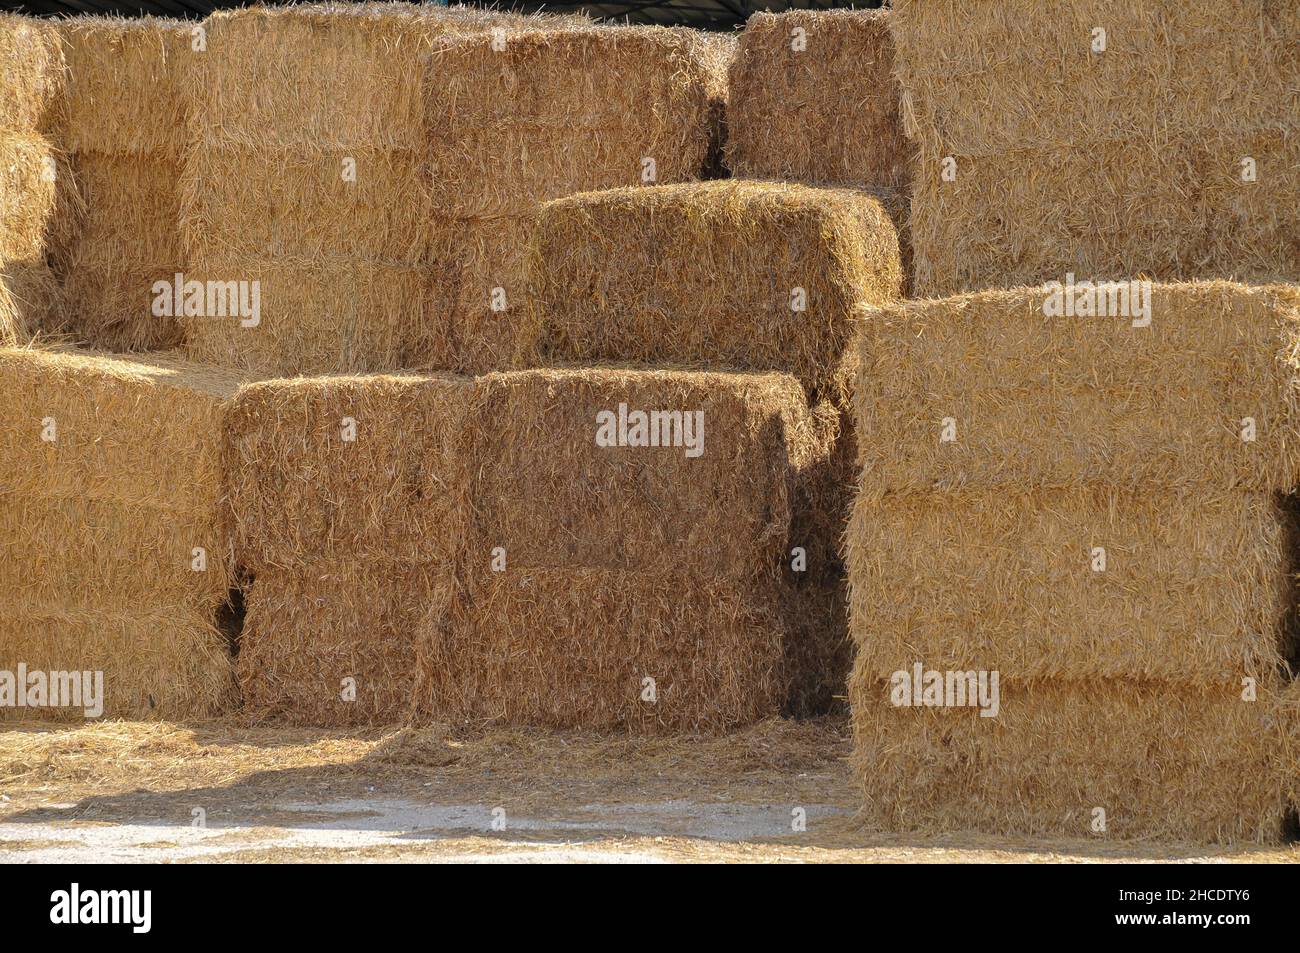 Bales of straw in storage in a dairy farm. Photographed at Kibbutz Harduf, Galilee, Israel Stock Photo